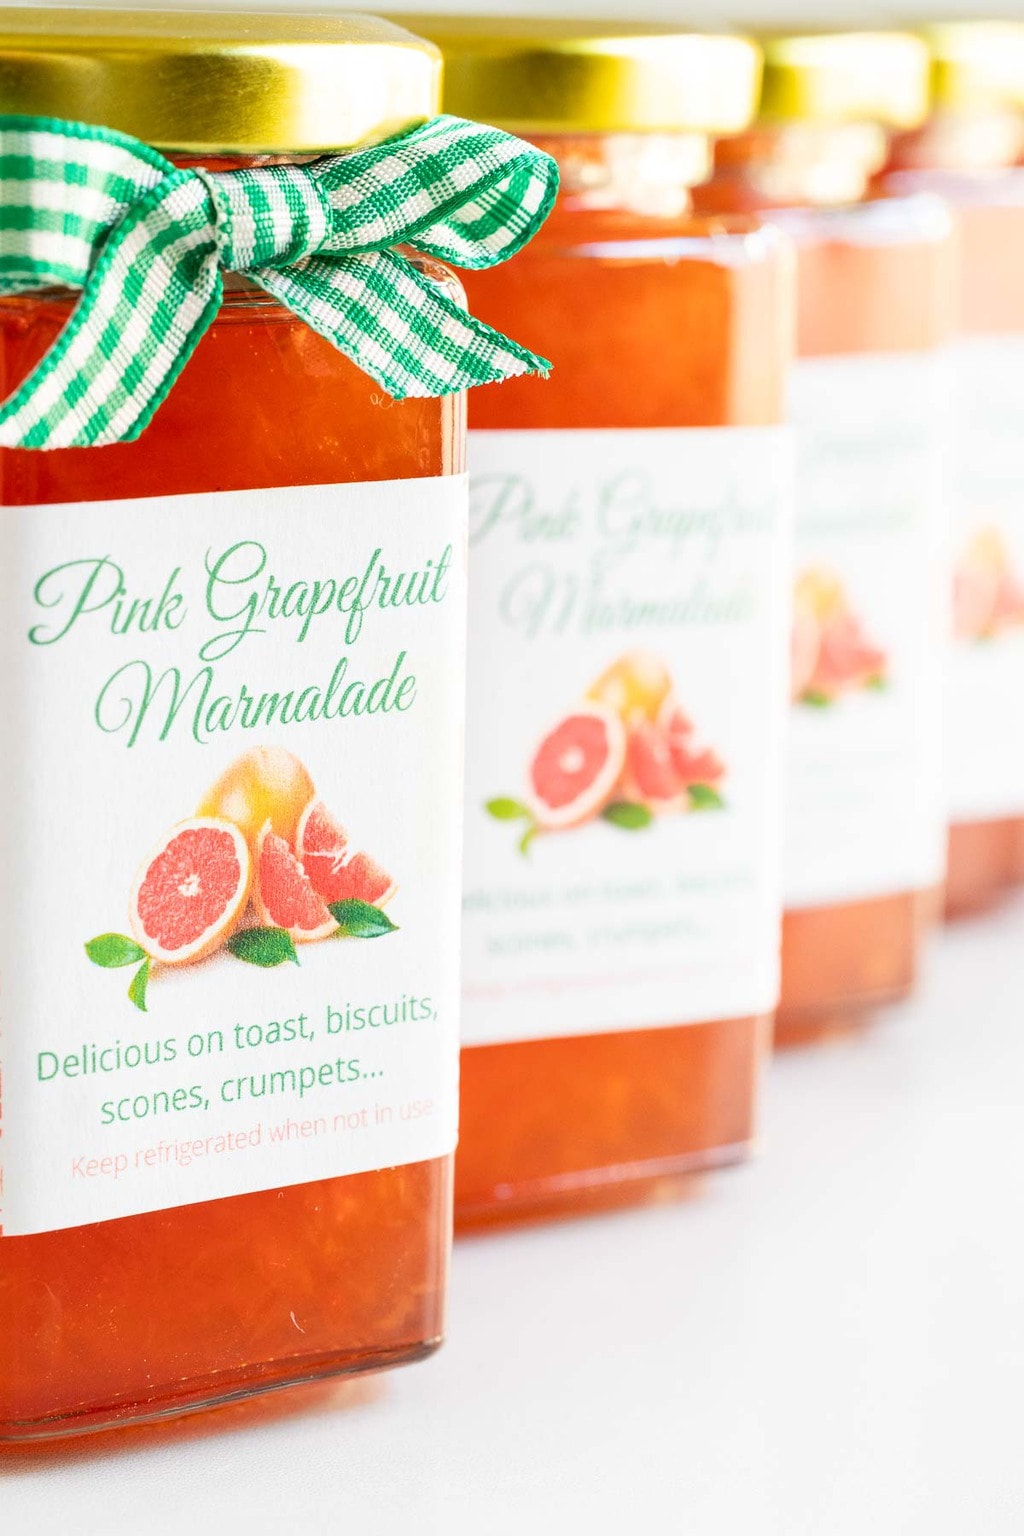 Vertical extreme closeup photo of a row of jars of Pink Grapefruit Marmalade with custom labels and decorative ribbons.